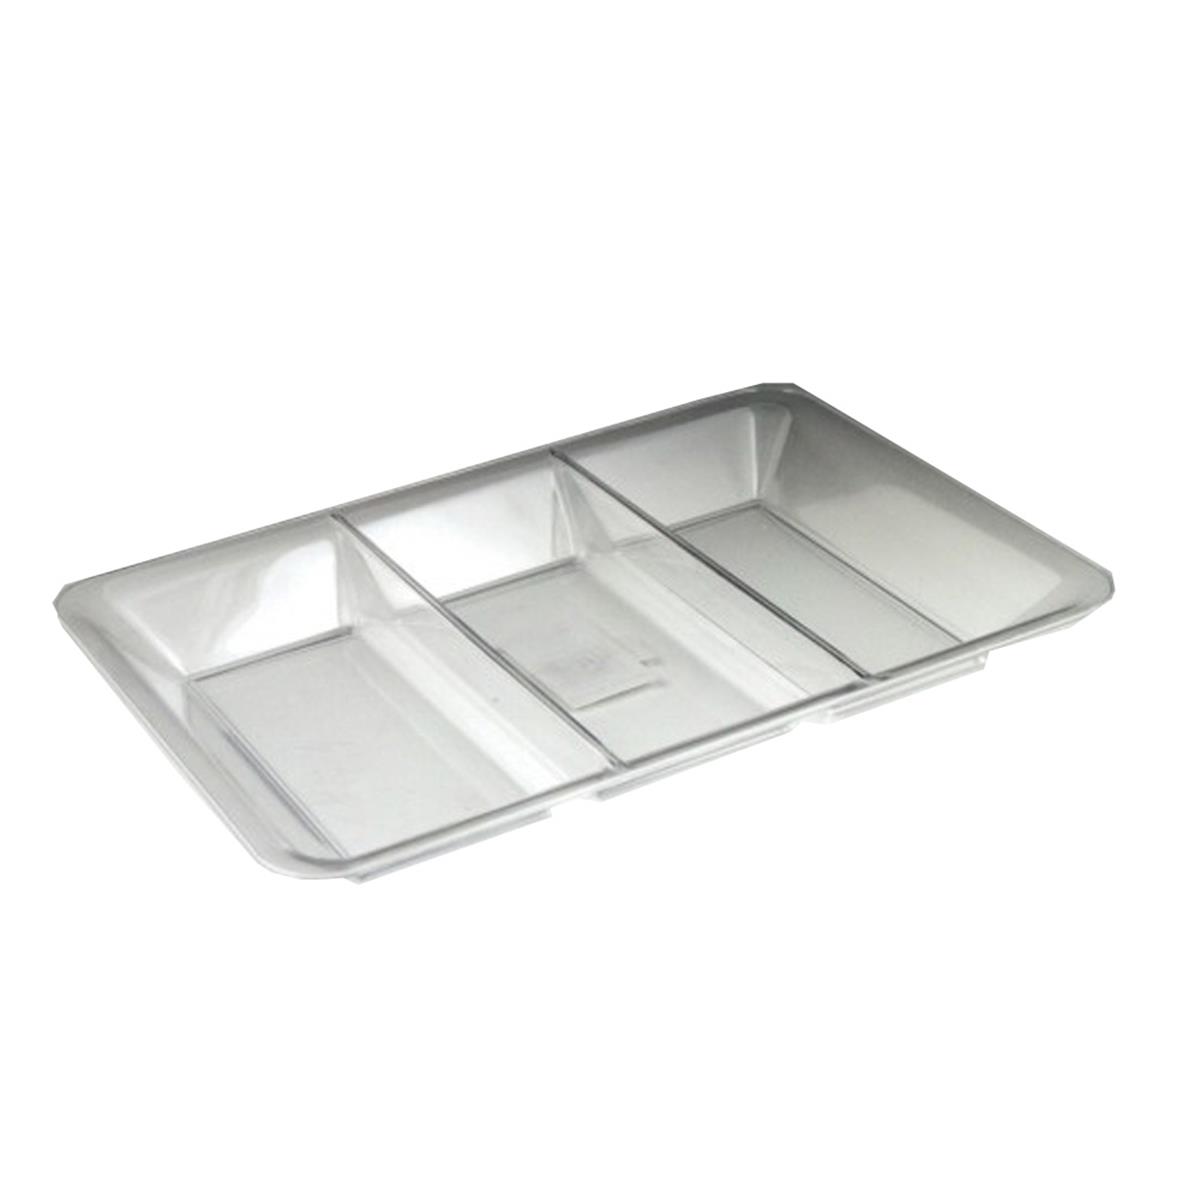 Mpi95146 Pe 9.5 X 14 In. Clear Sovereign Rectangular Compartment Tray - Case Of 25